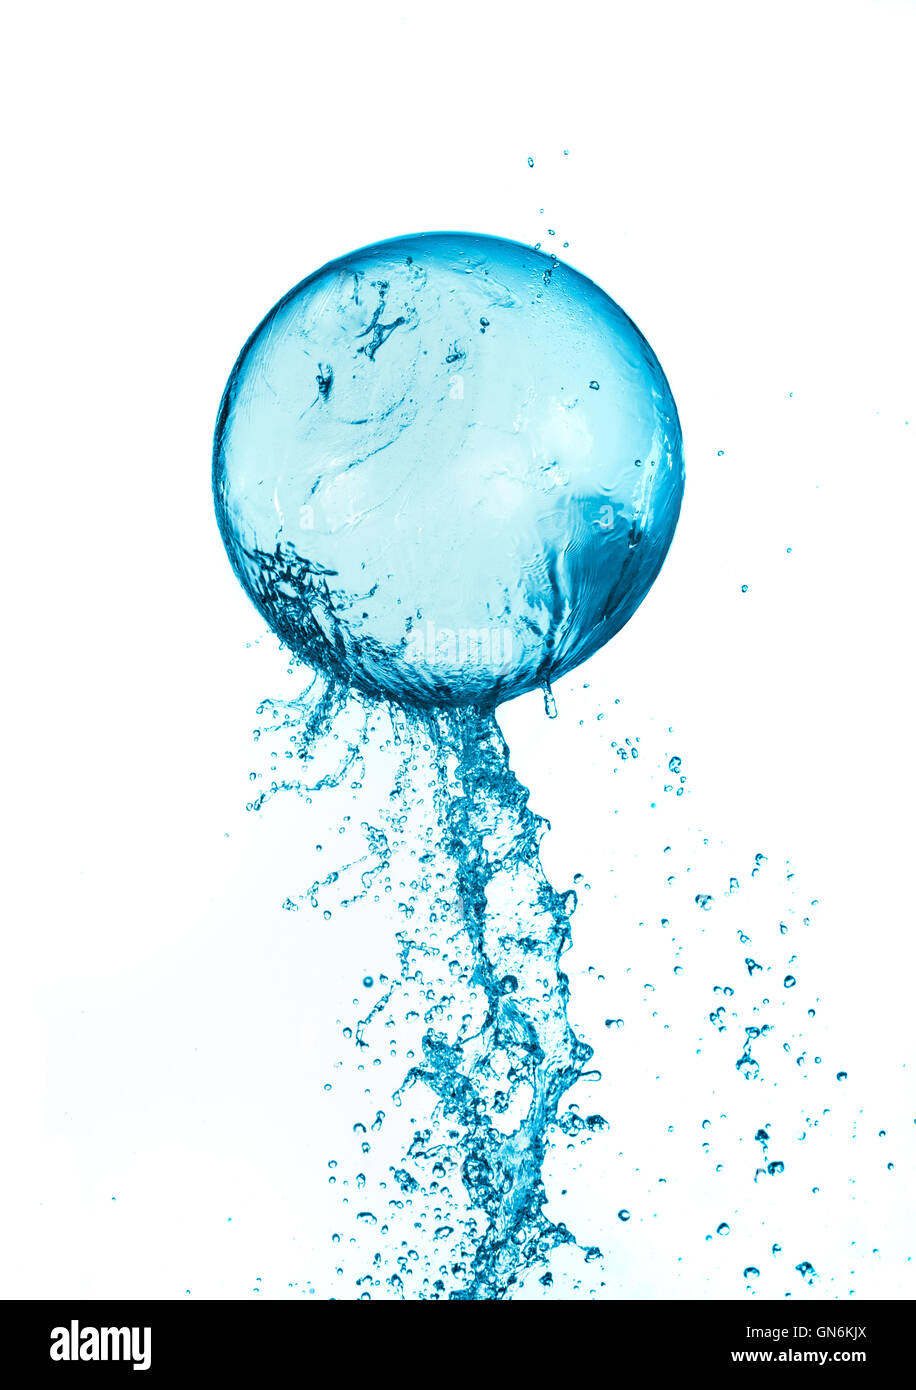 Abstract water ball splash isolated on white background. Stock Photo